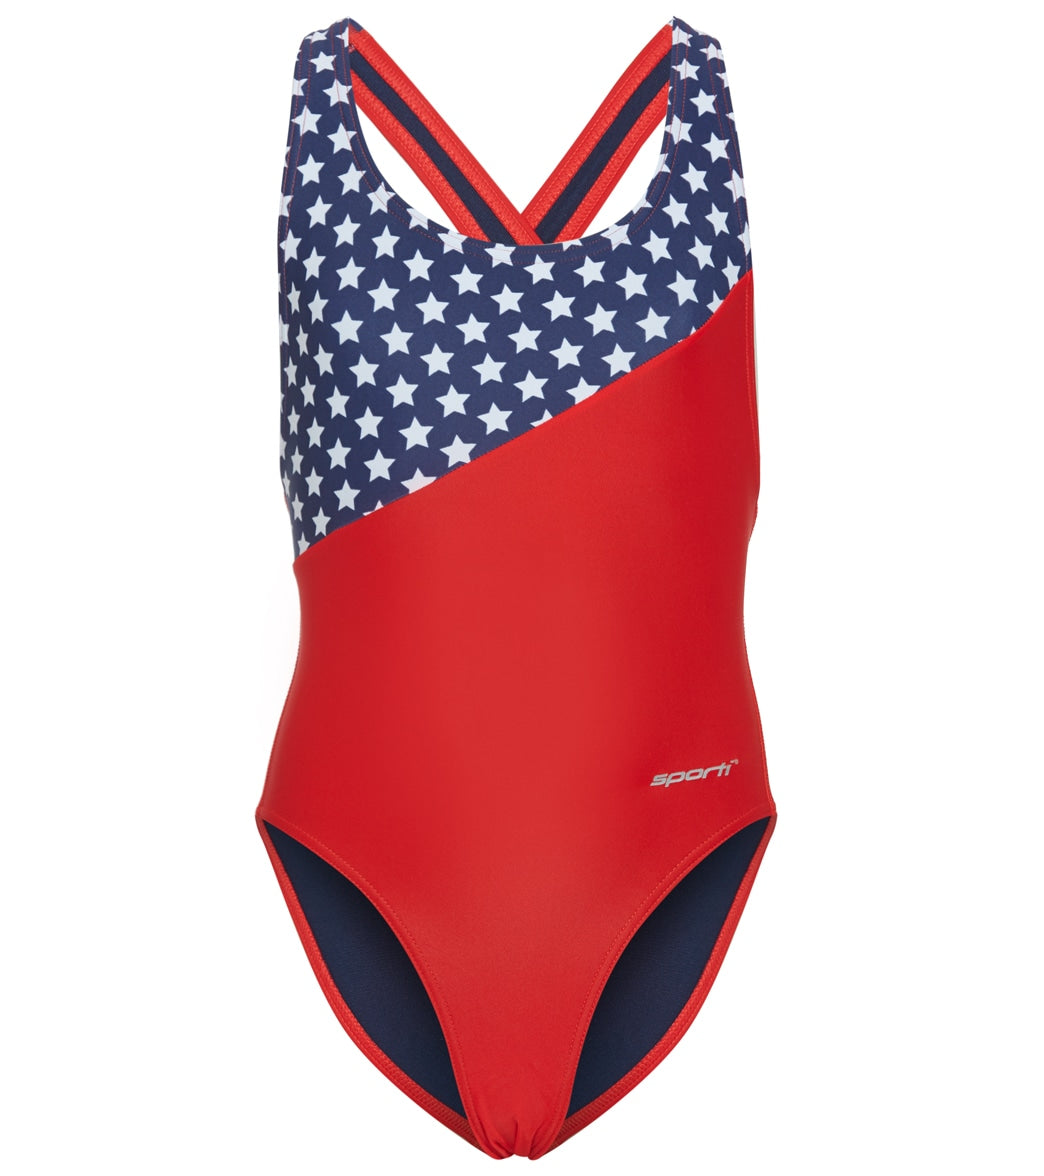 Sporti Star Spangled Wide Strap Cross Back One Piece Swimsuit Youth 22-28 - Red/White/Blue 22Y - Swimoutlet.com